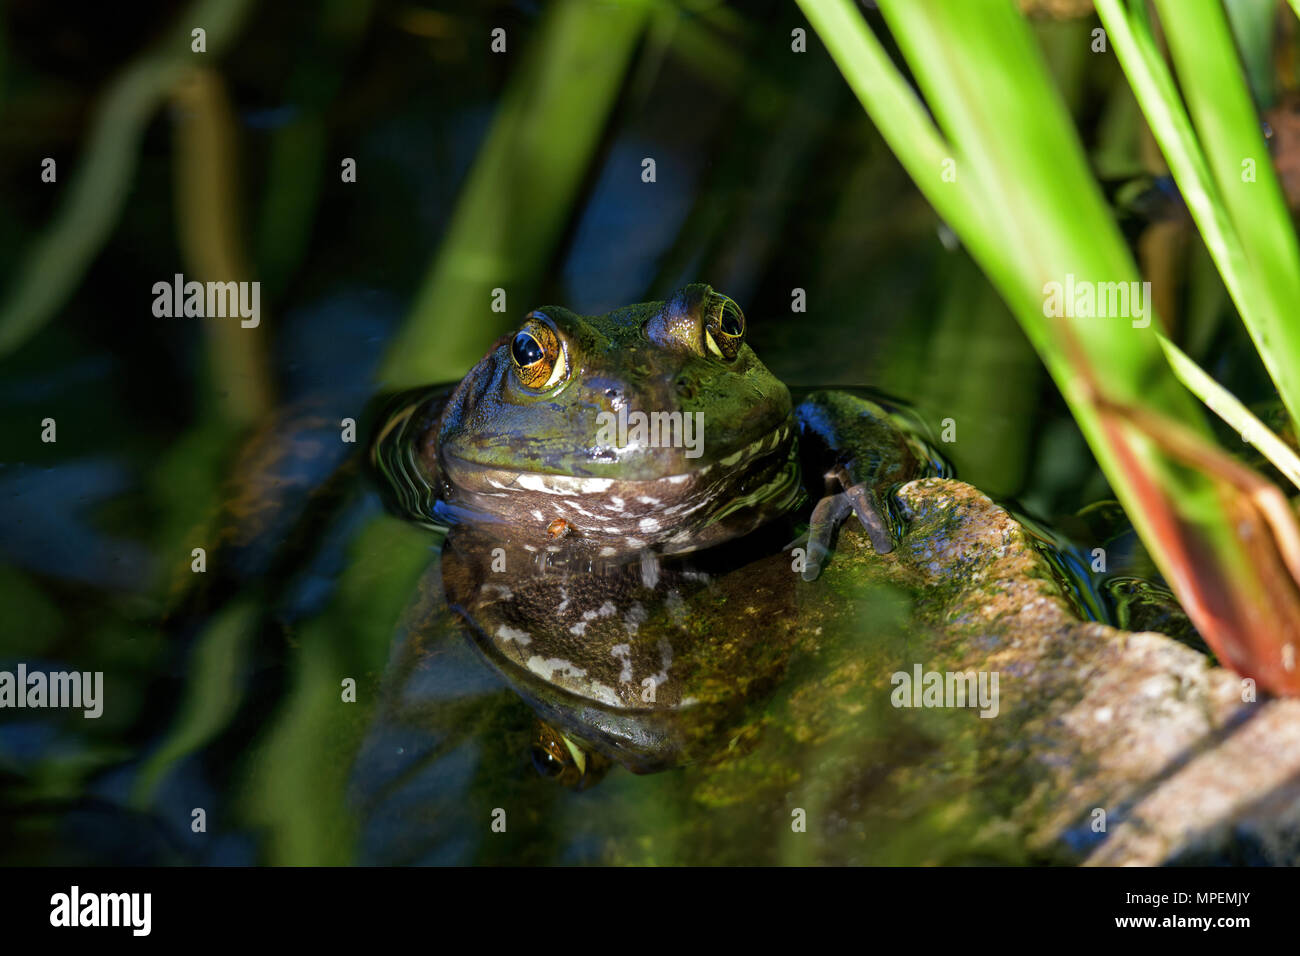 American bullfrog in a reflecting pond. It is an amphibious frog, and a member of the family Ranidae, or true frogs. Stock Photo